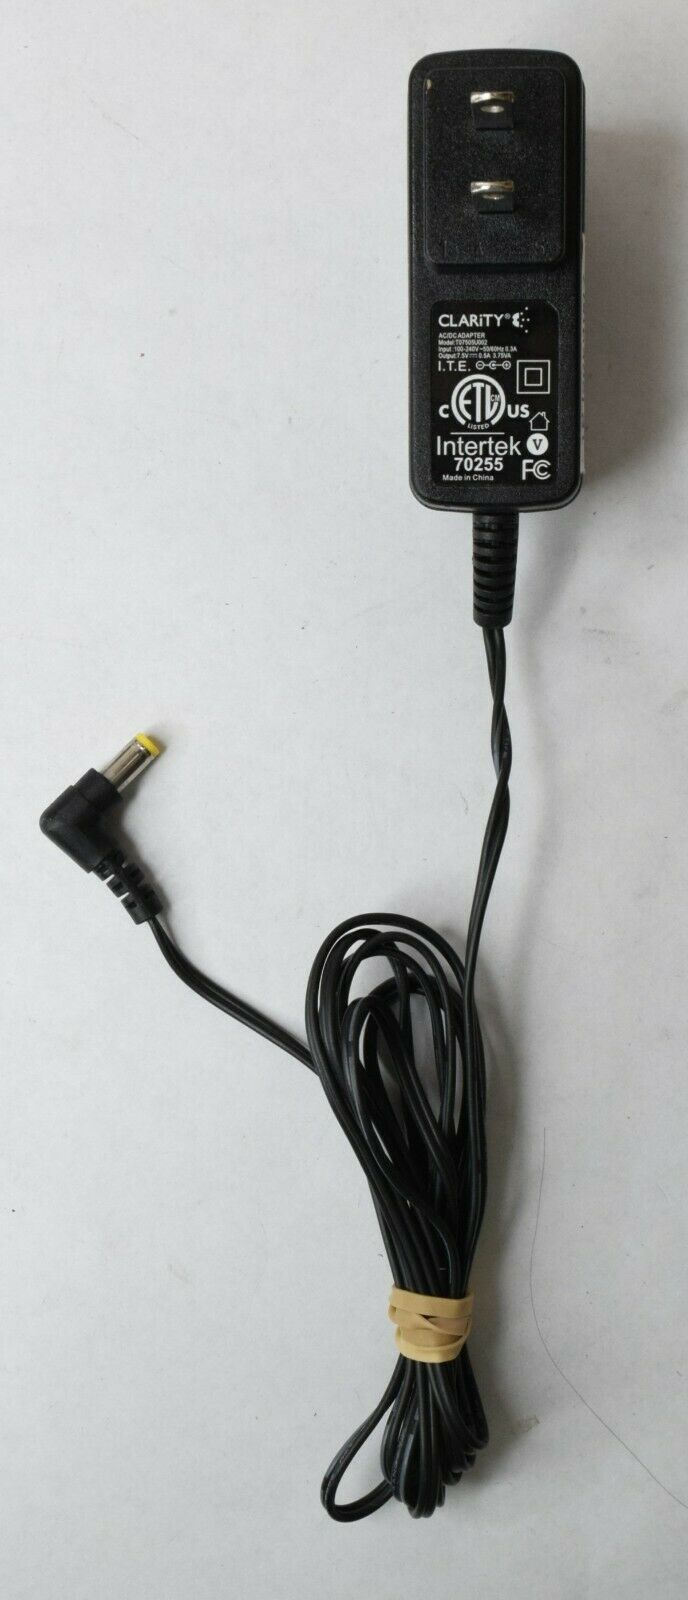 Clarity Power Supply Adapter Unit T075-5U002 7.5V 0.5A Type: Adapter Output Voltage: 7.5 V Features: Powered Brand: Cl